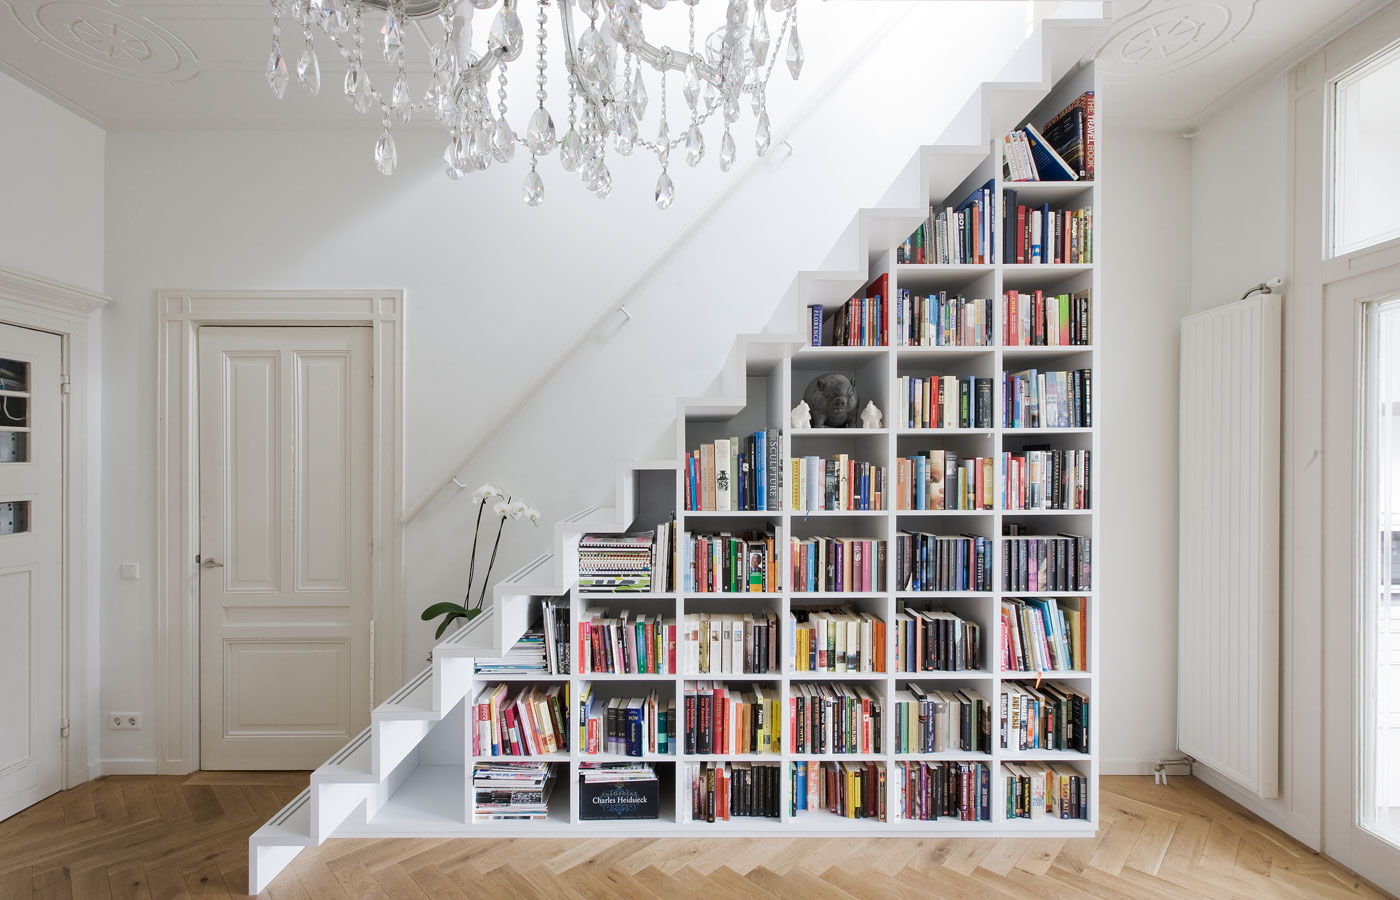 https://www.clutter.com/blog/wp-content/uploads/2016/02/09143843/staircase-book-storage-hack-for-small-apartments.jpg